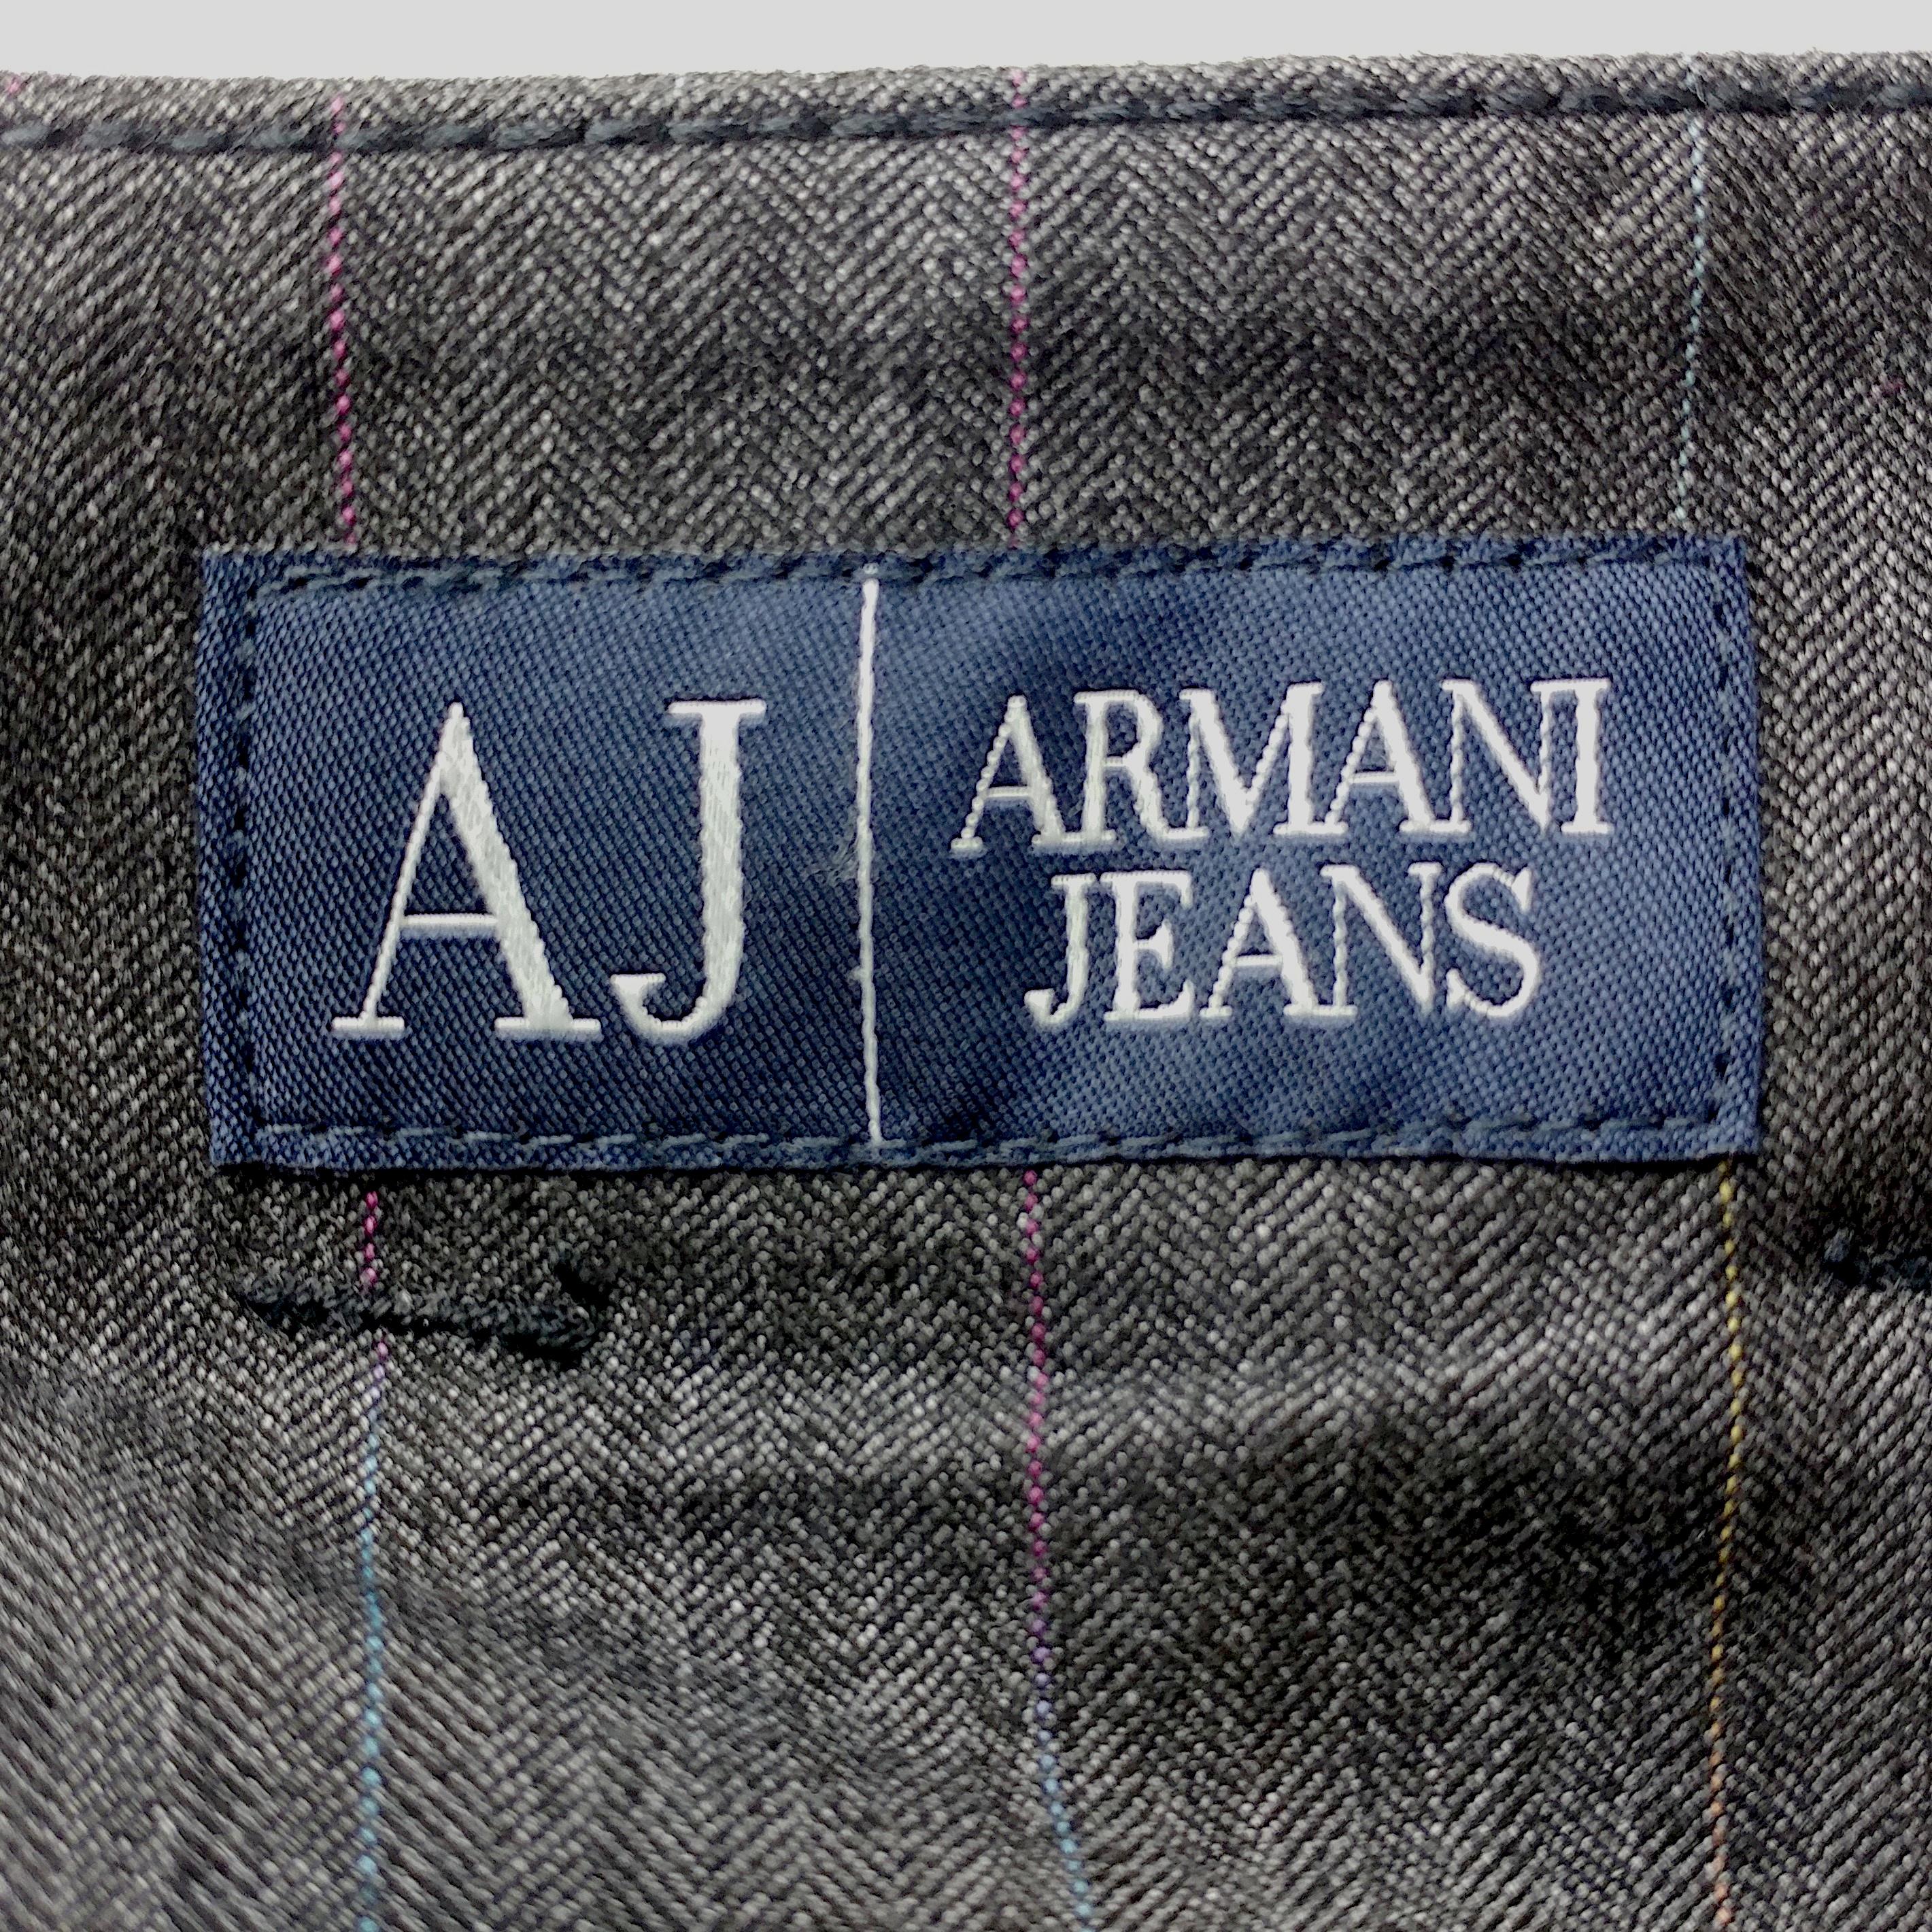 ARMANI JEANS - Gray Belted Wrap Skirt High Waist and Front Pockets  Size 8US 1